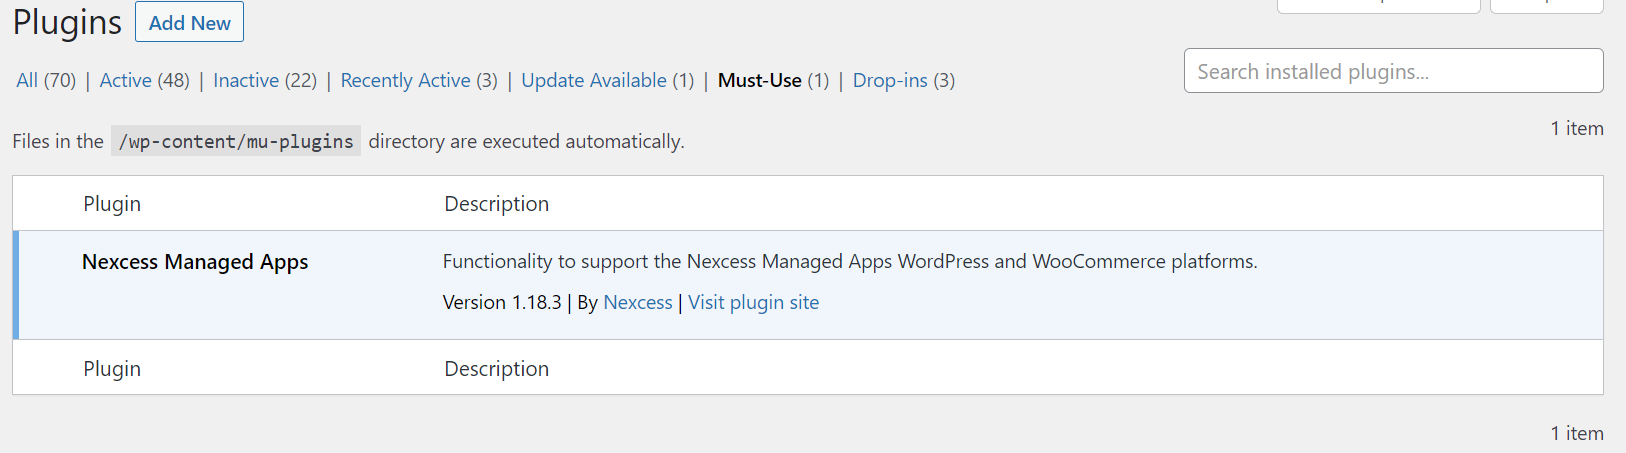 From the admin panel, select Plugins and click the Add New button.